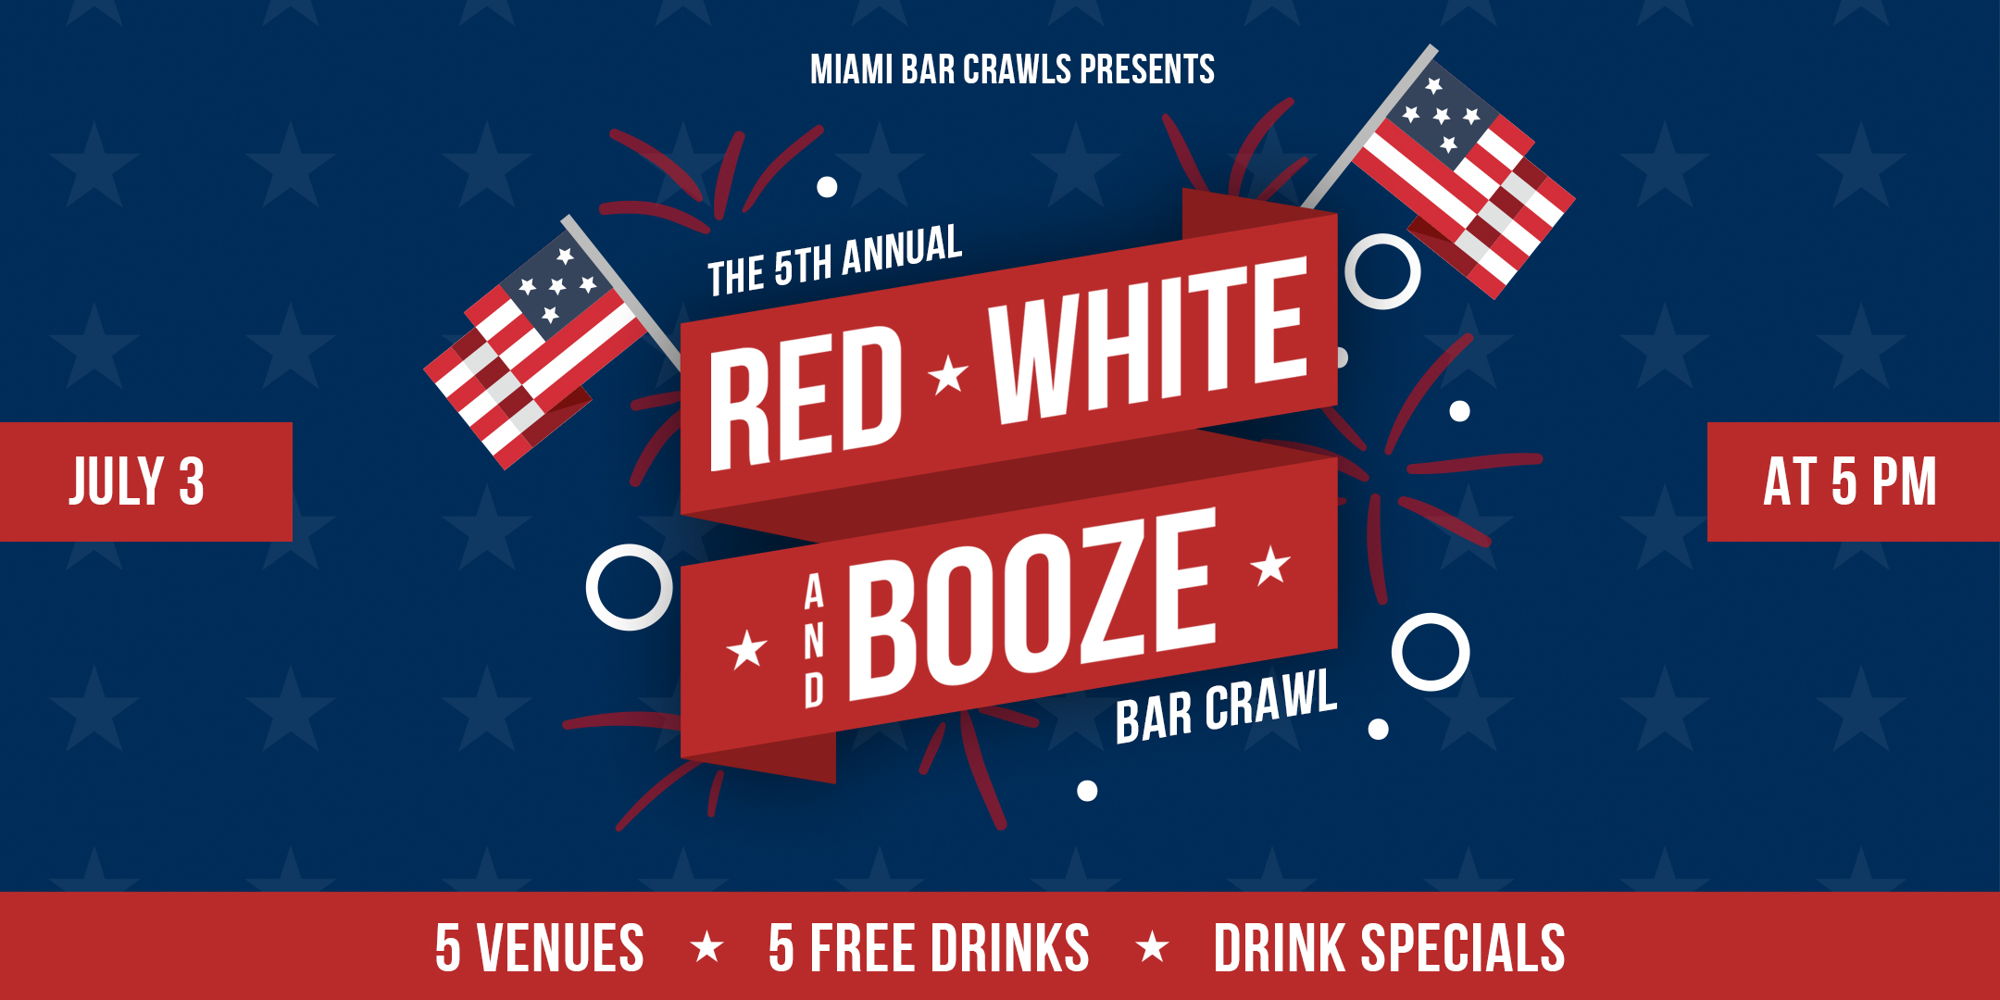 5th Annual Red, White, & Booze Bar Crawl in Brickell! promotional image